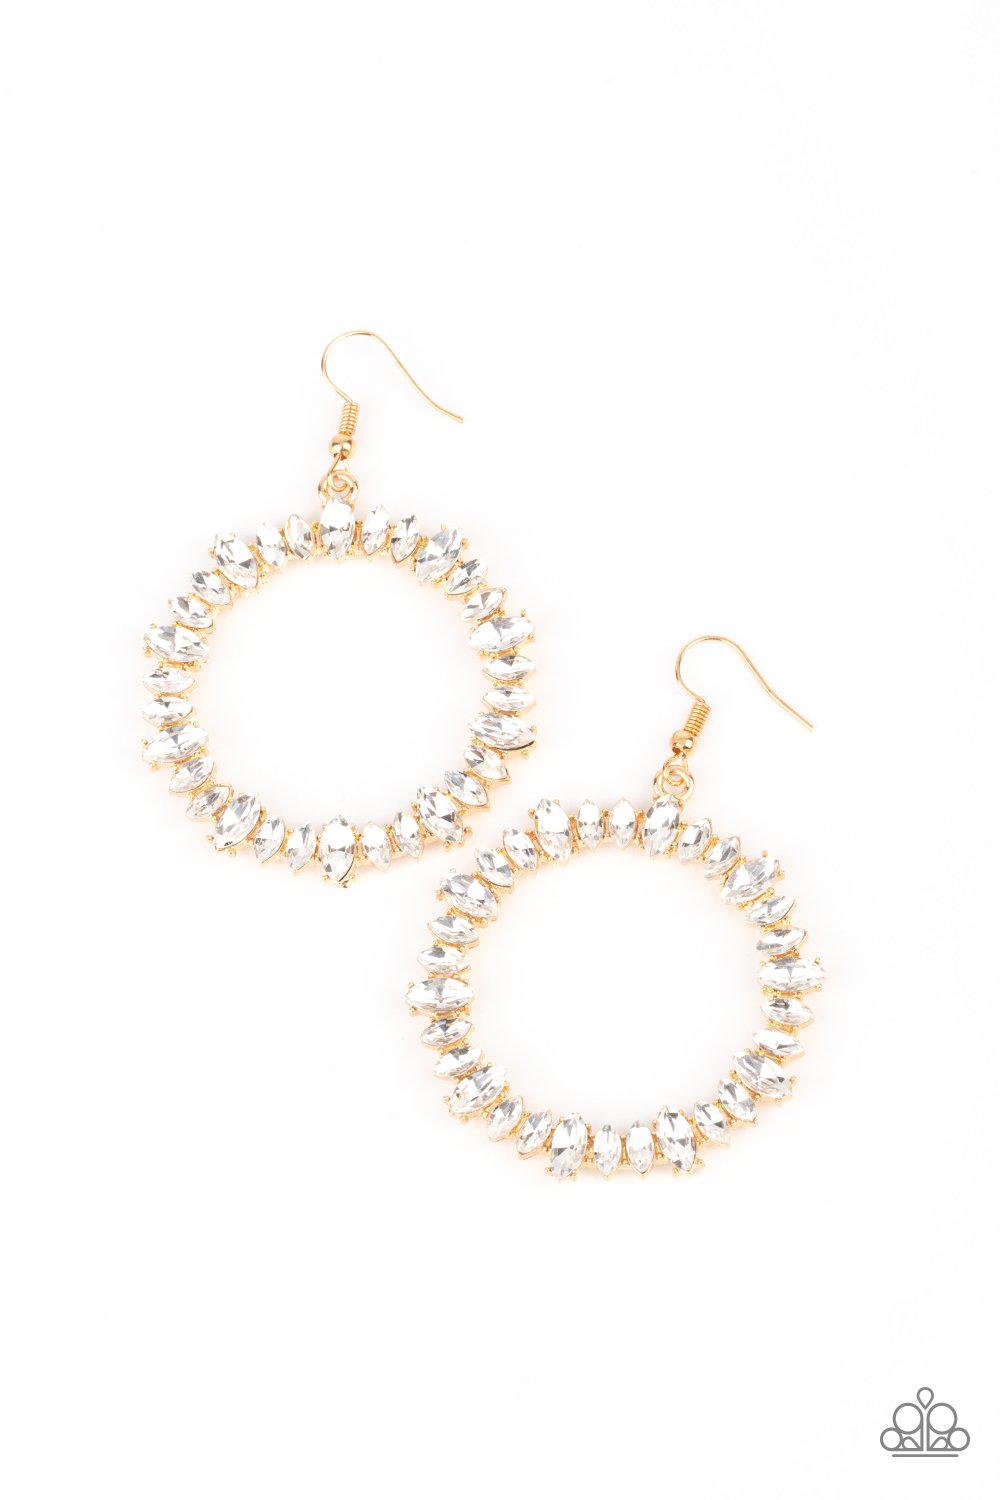 Glowing Reviews Gold and White Rhinestone Earrings - Paparazzi Accessories 2021 Convention Exclusive- lightbox - CarasShop.com - $5 Jewelry by Cara Jewels